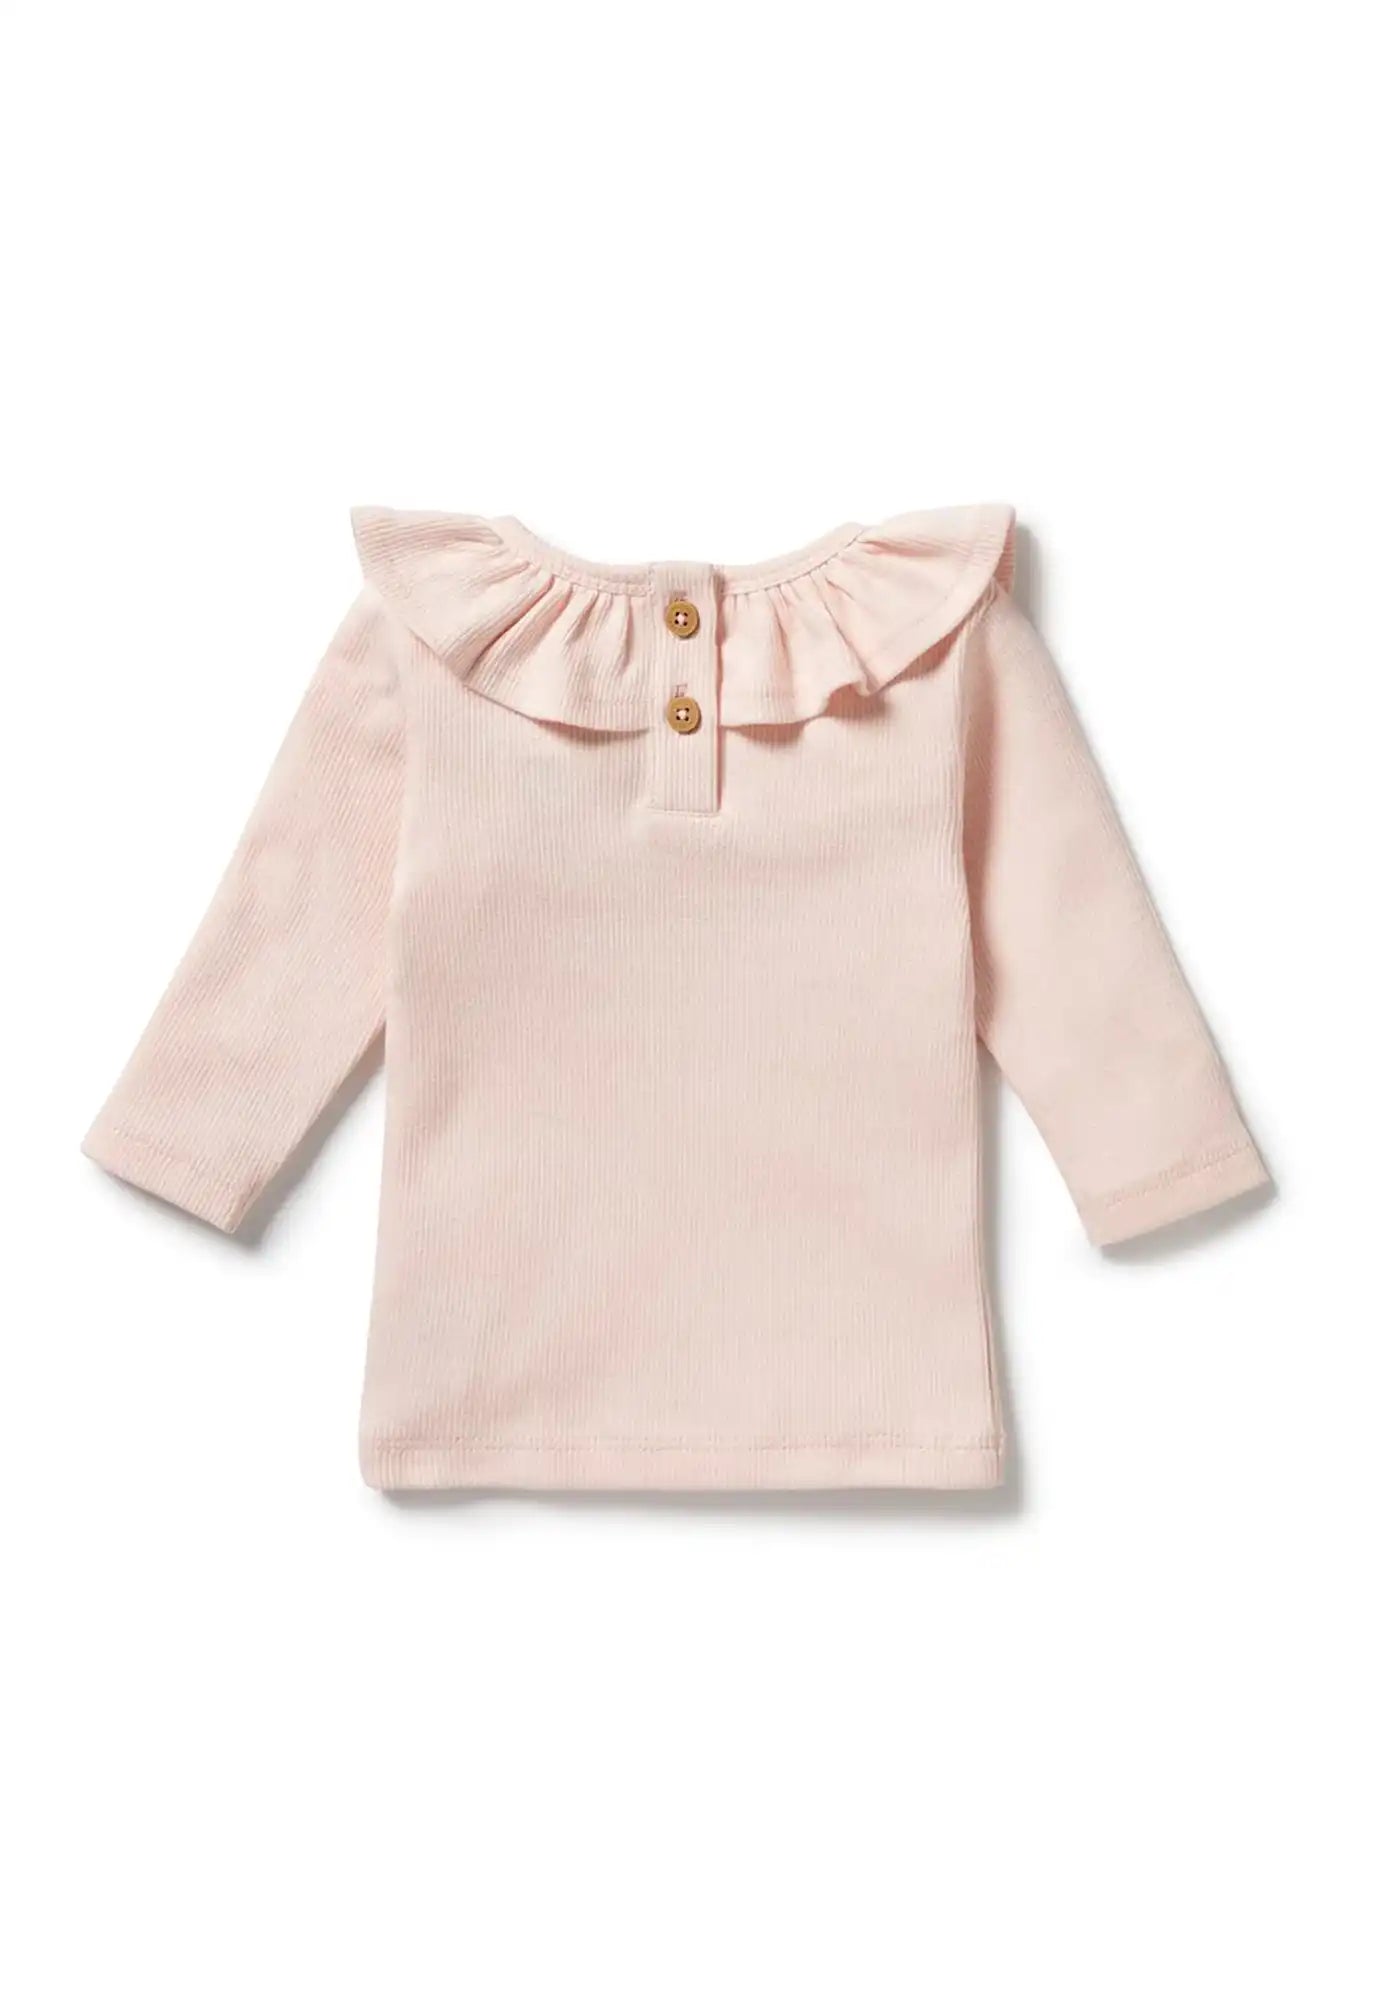 wilson & frenchy - ruffle top - pink